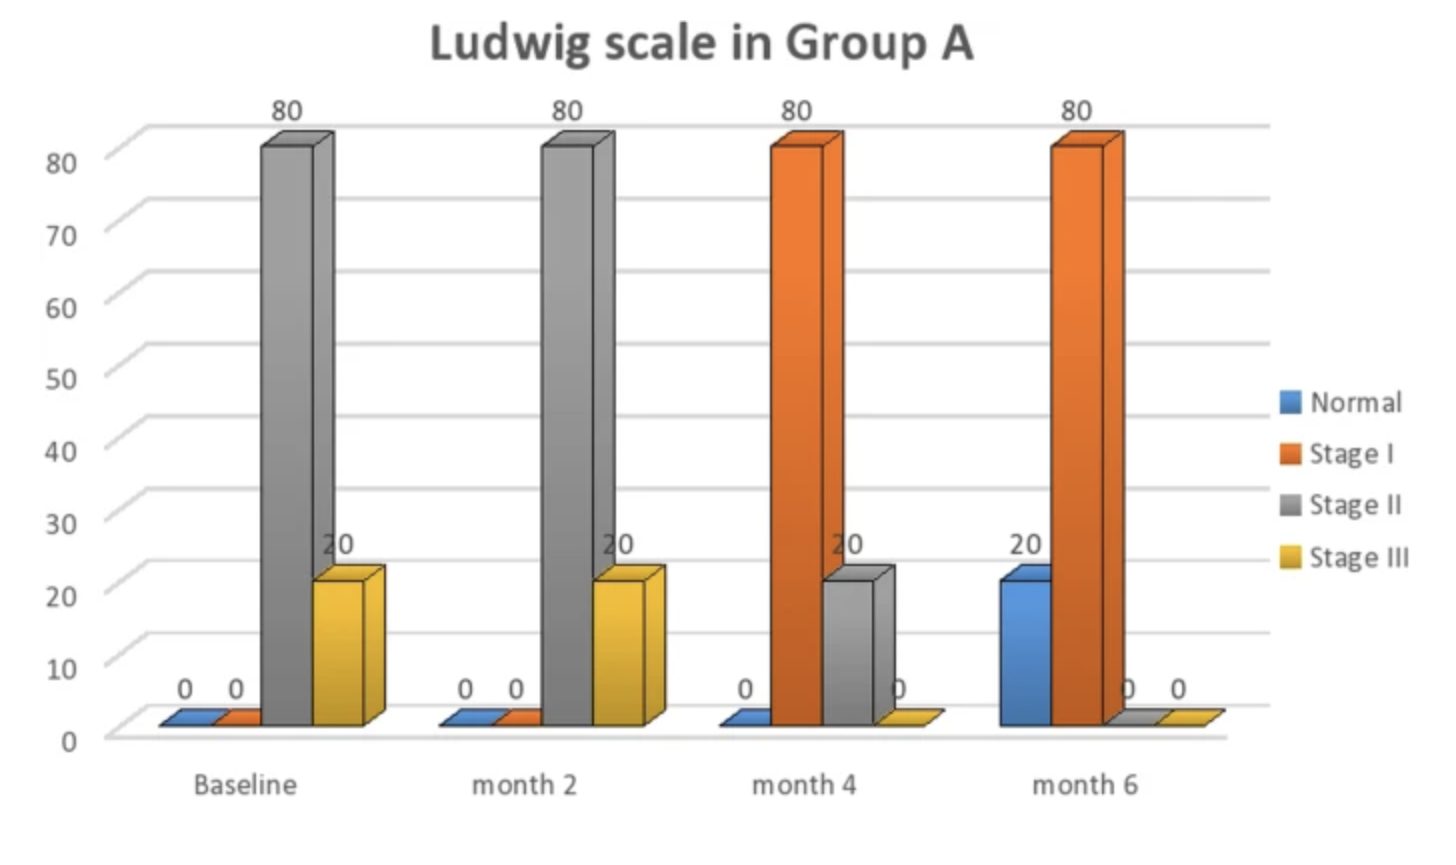 graph showing minoxidil hair changes according to ludwig scale